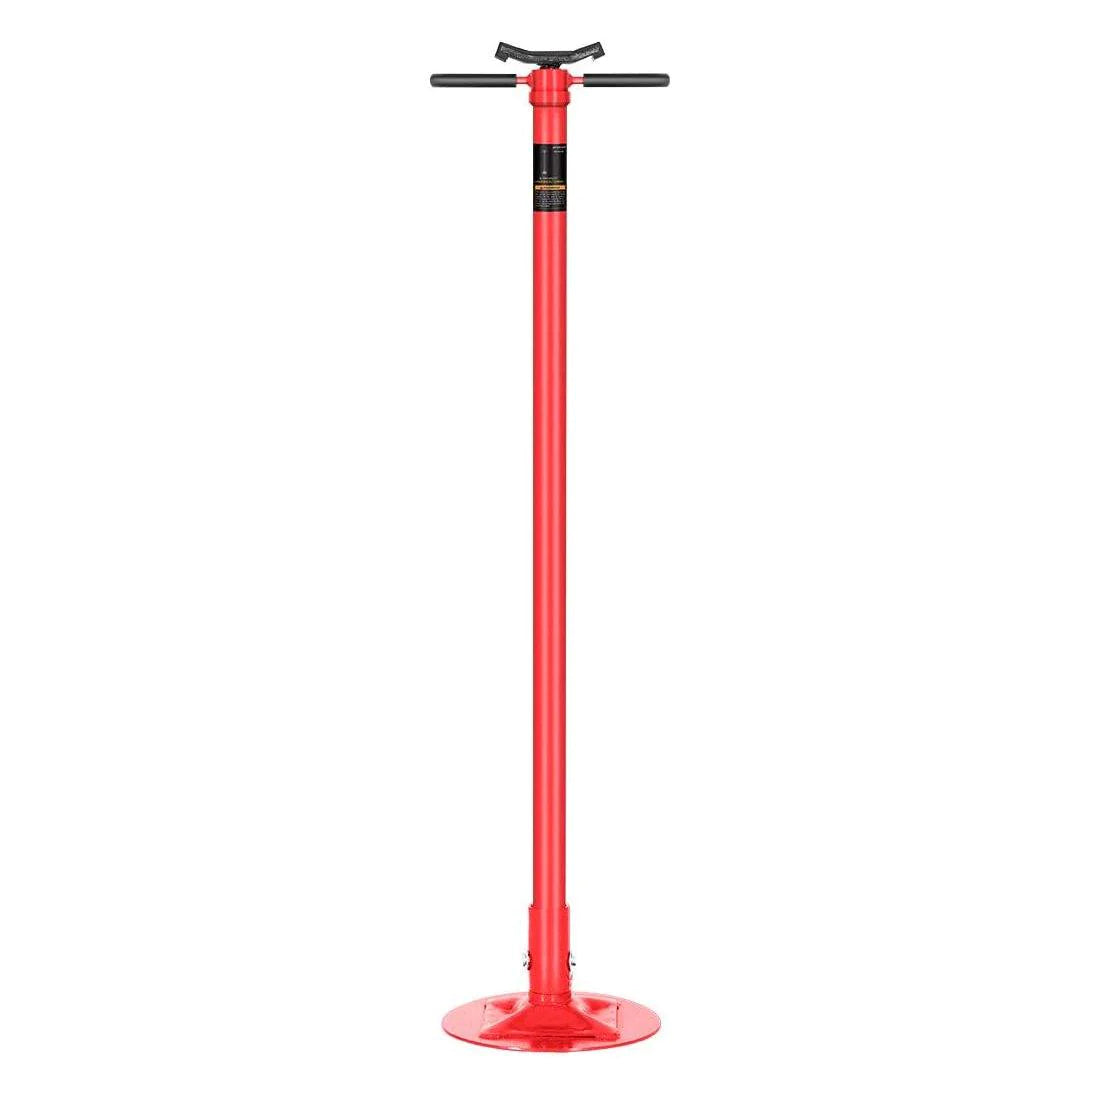 SPECSTAR Under Hoist Support Stand with Foot Pedal 3/4 Ton 1650 Lbs. Capacity